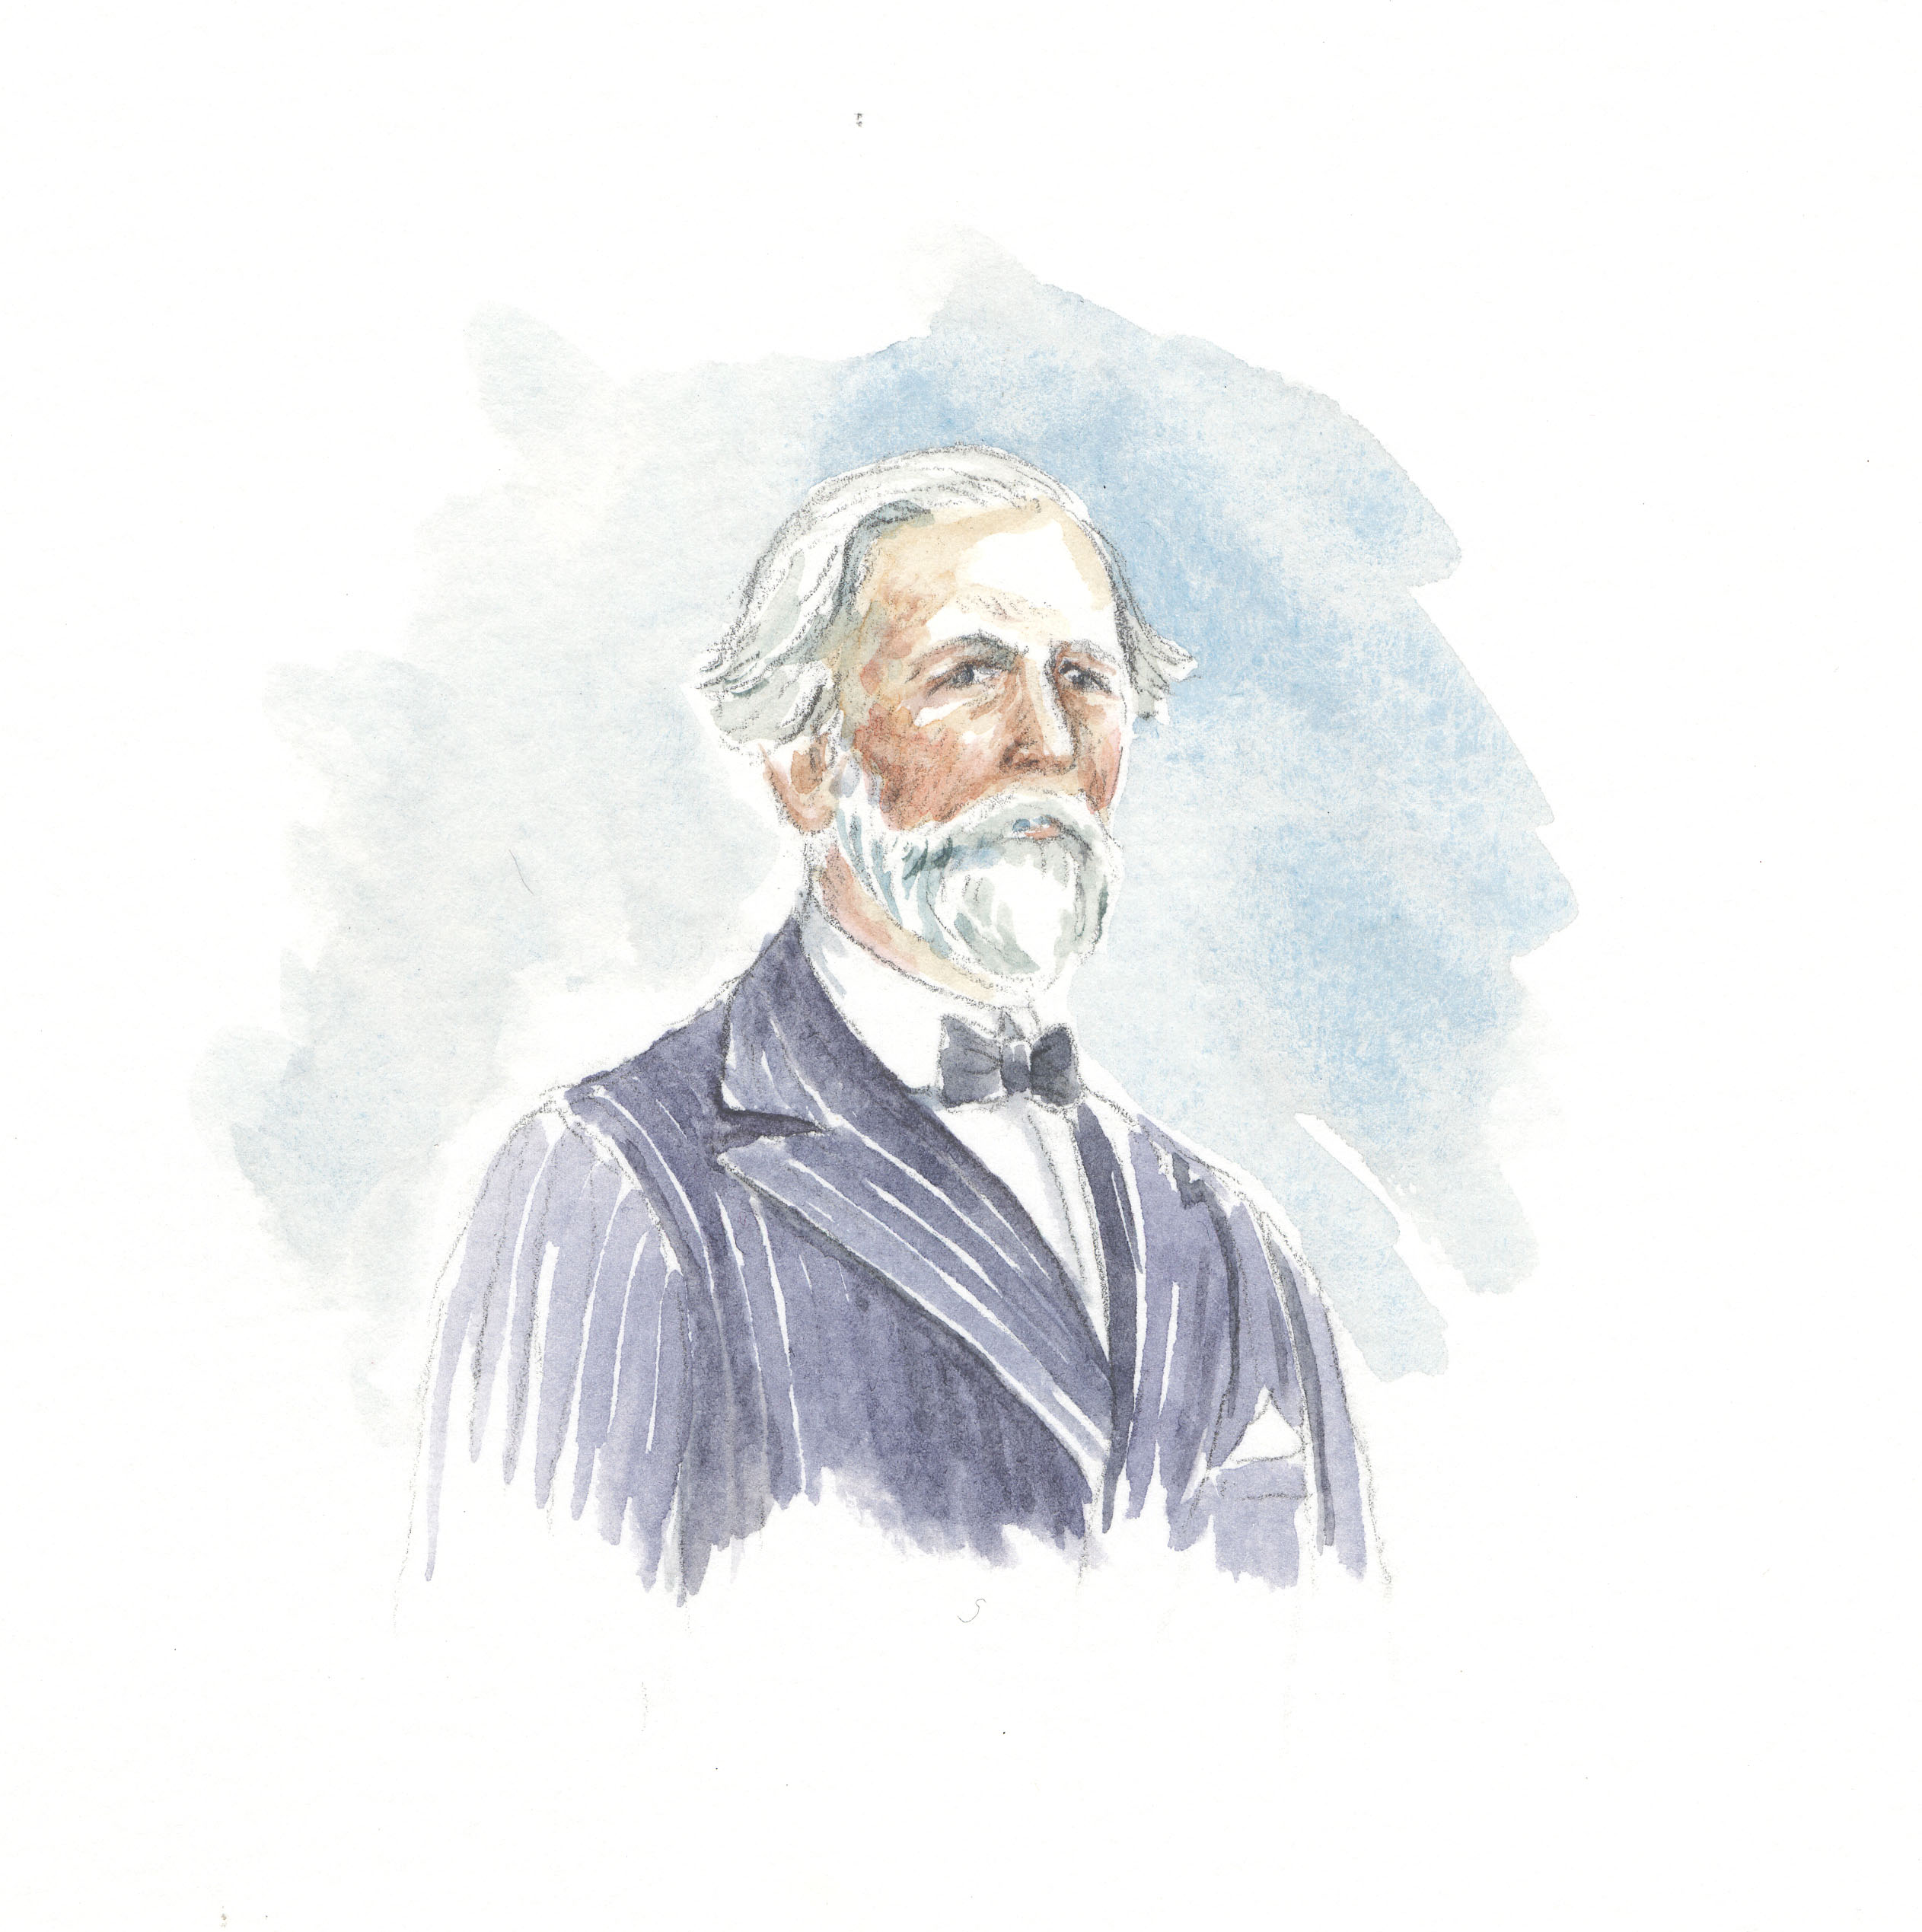 watercolour image showing head and shoulders of man with white hair and beard